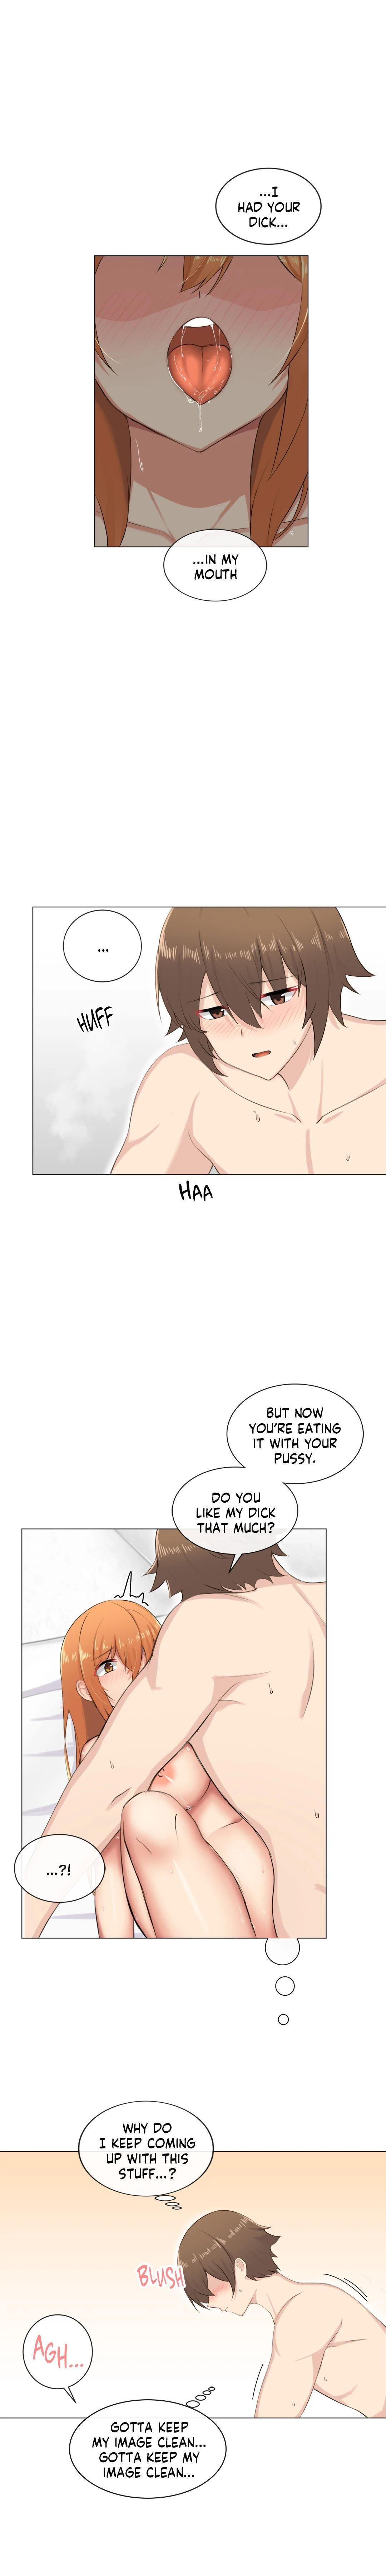 [Dumangoon, 130F] Sexcape Room: Pile Up Ch.9/9 [English] [Manhwa PDF] Completed 162